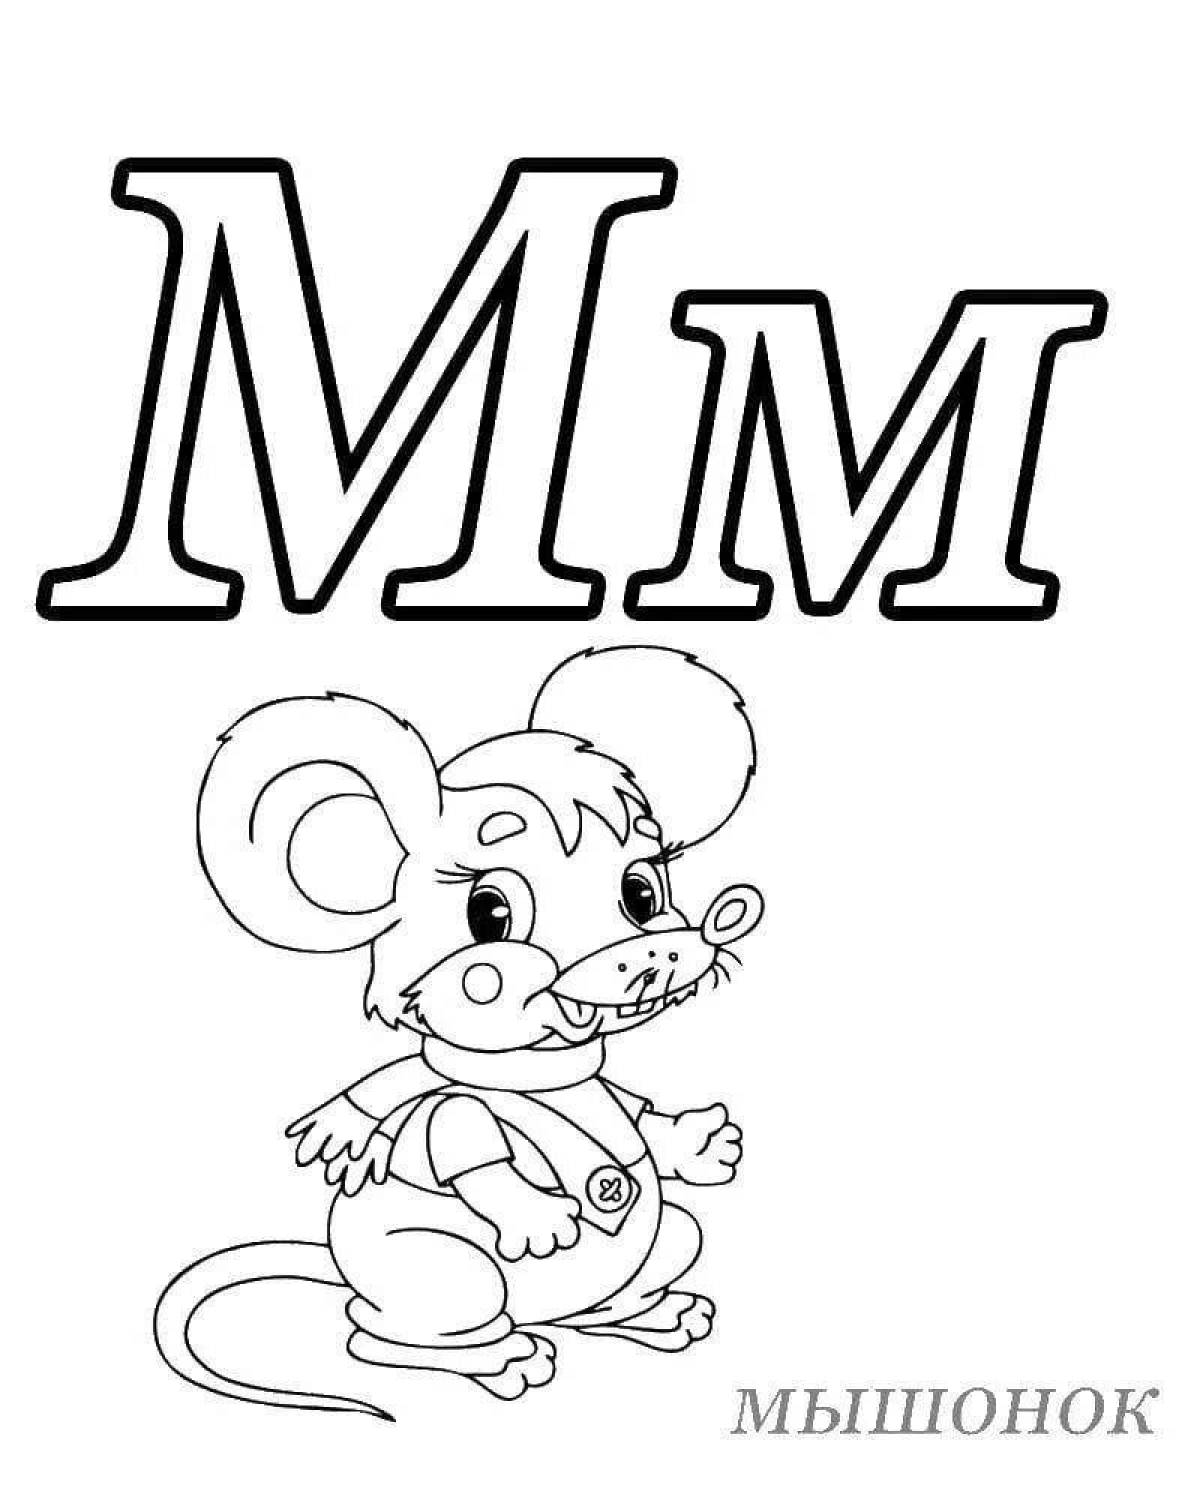 Playful m sound coloring page for kids